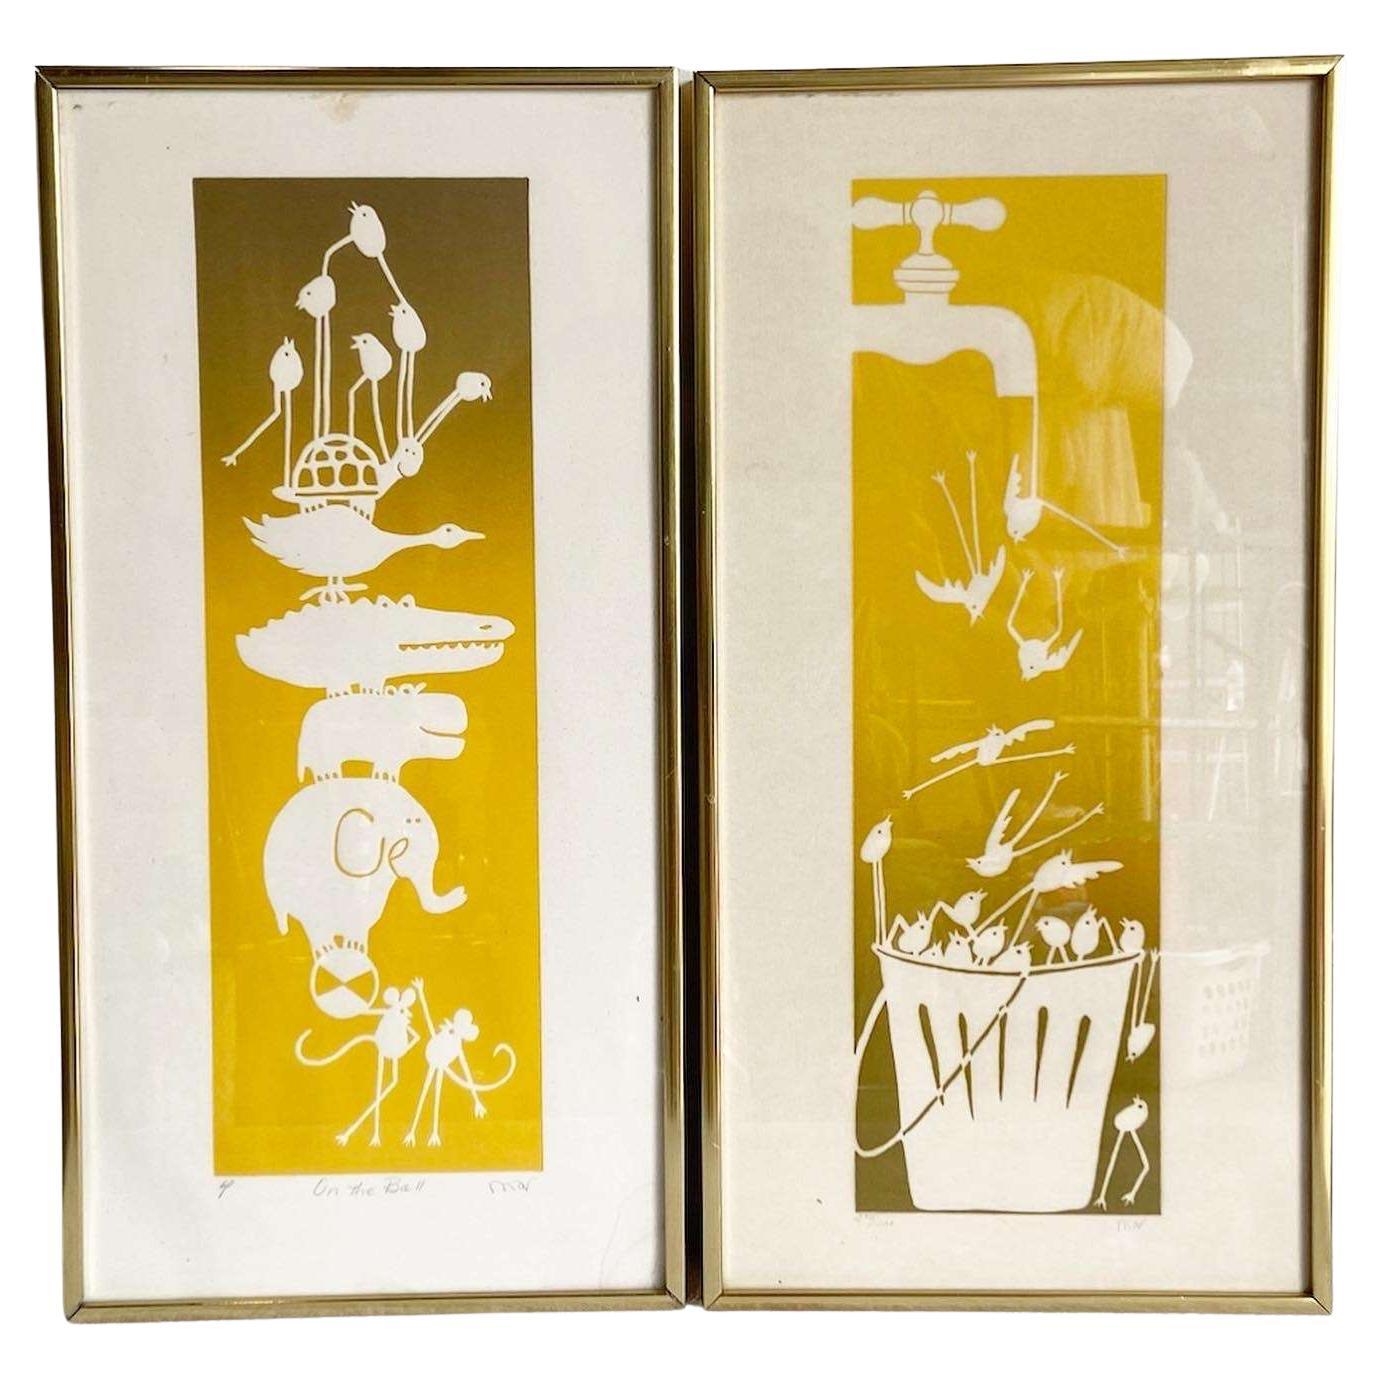 Mid Century Modern Signed and Framed Lithographs by Mar - a Pair For Sale